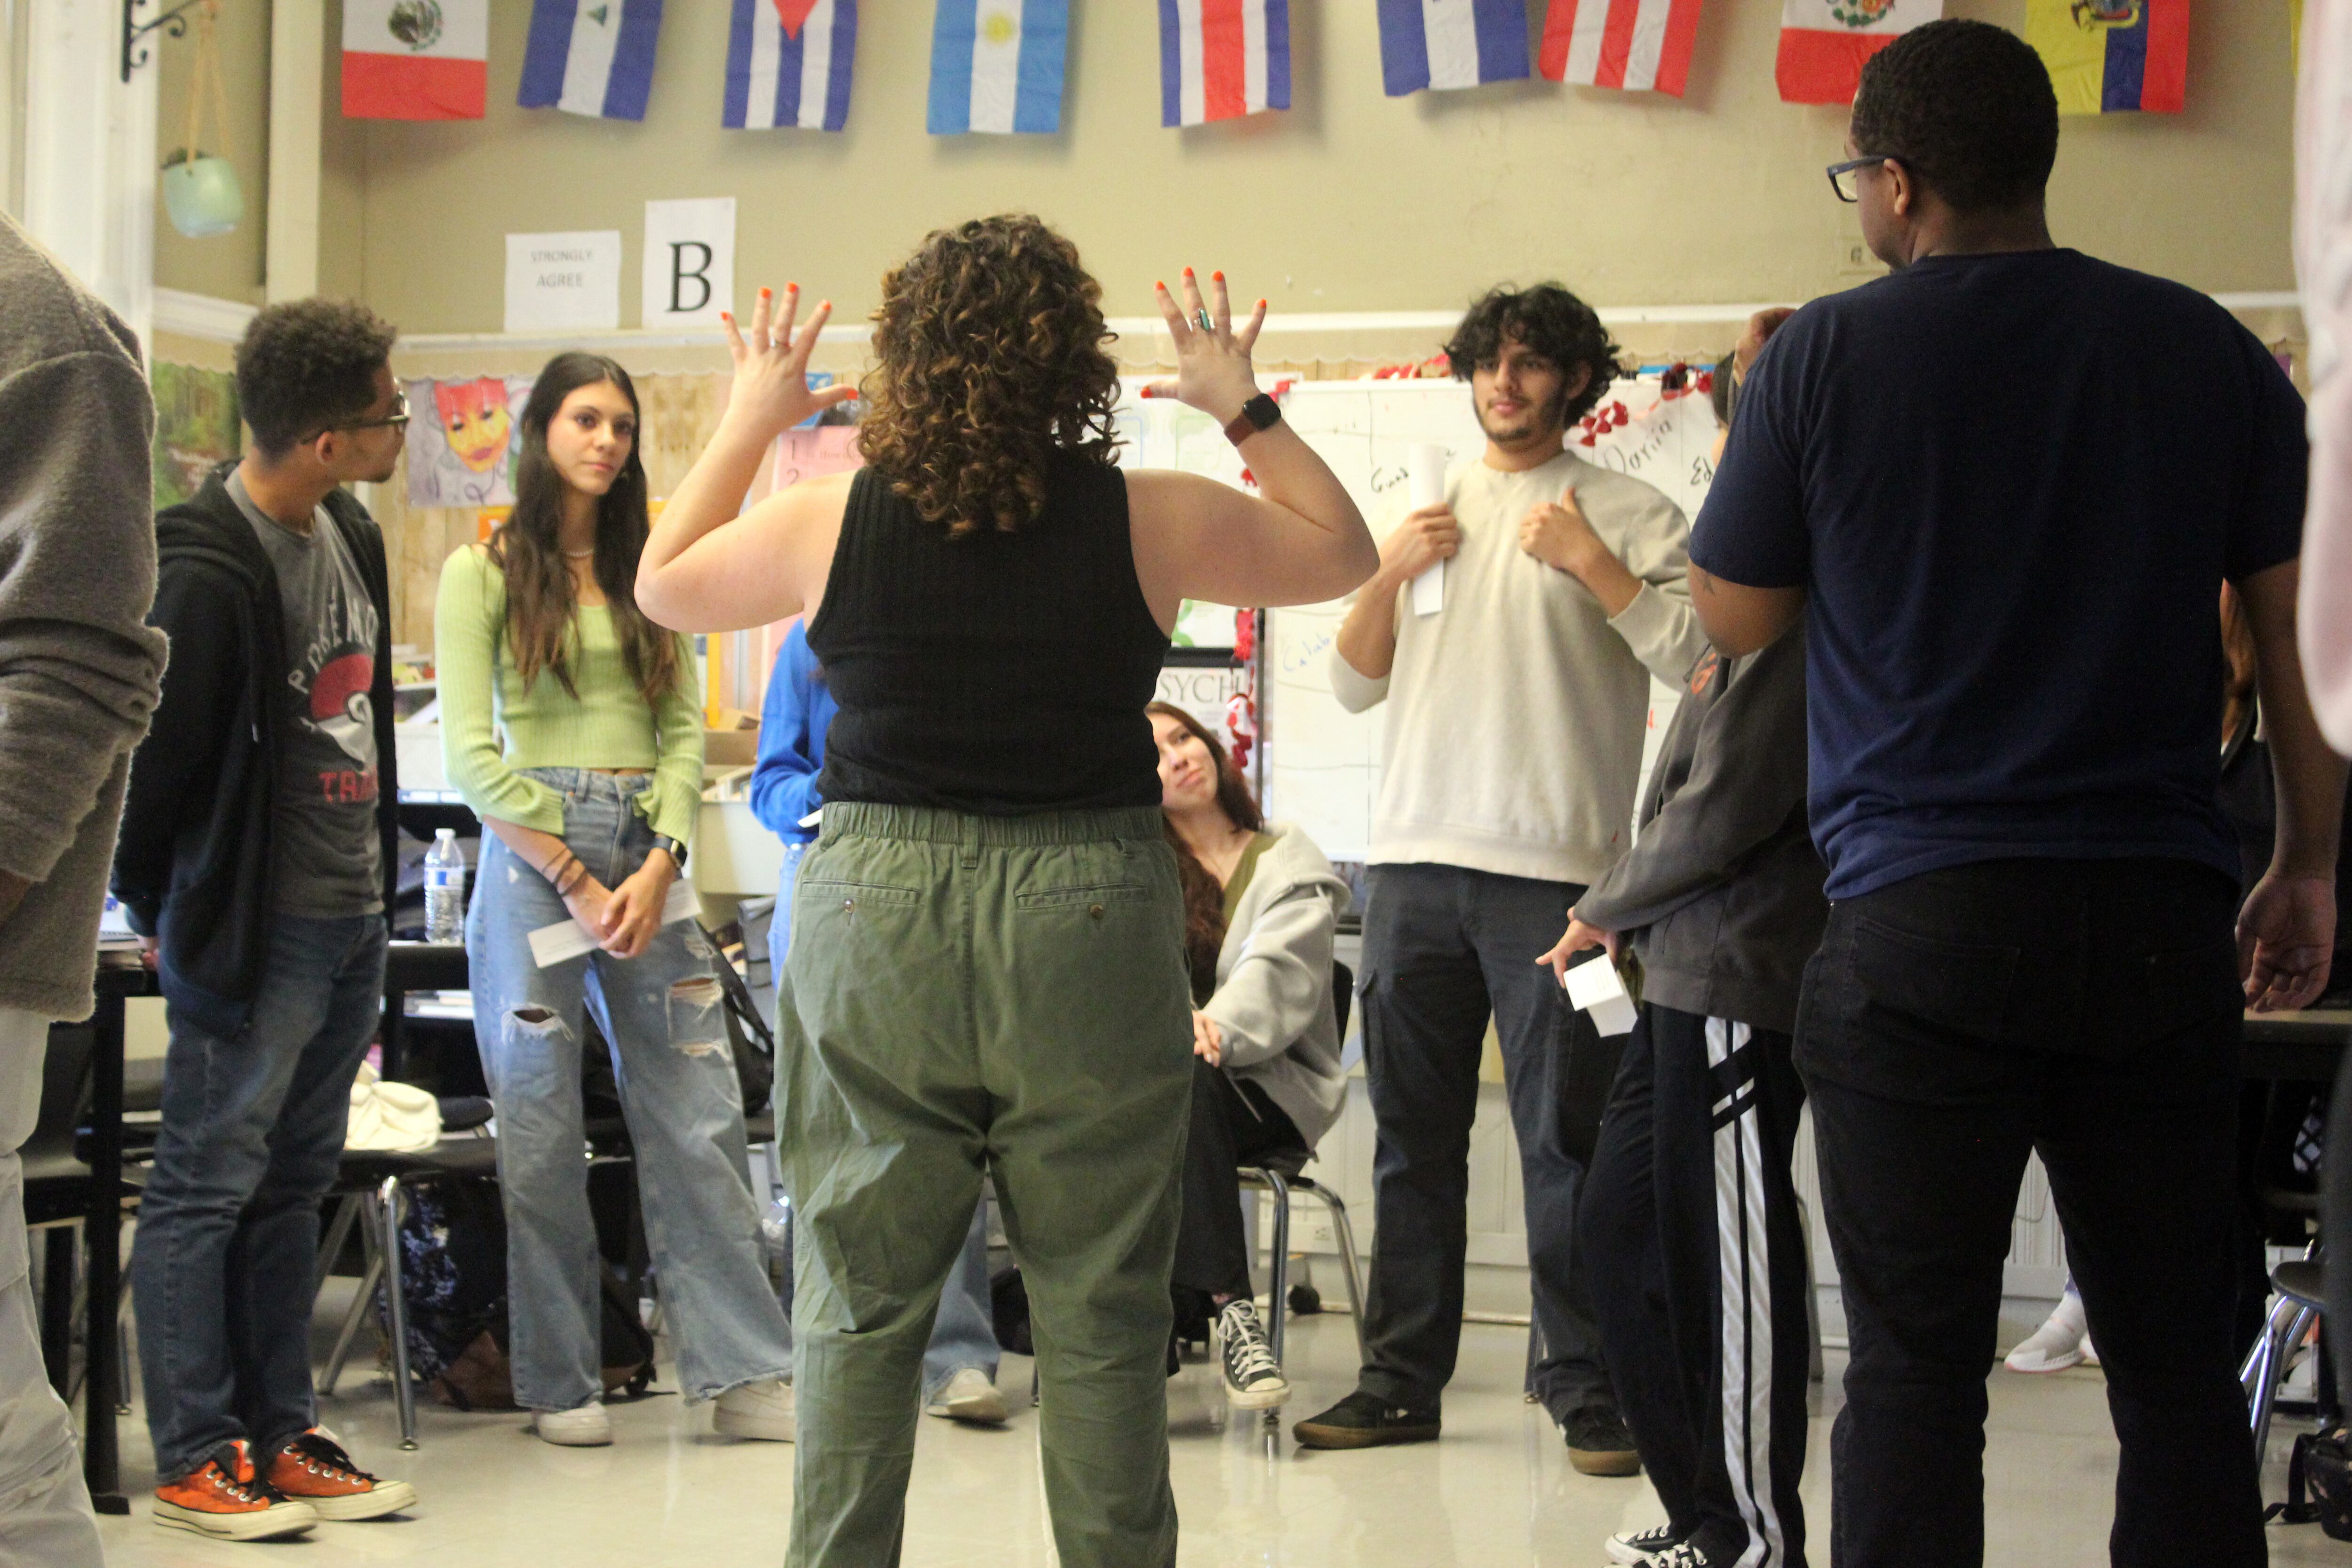 An adult holds her hands up in front of a group of high school students standing in a classroom.